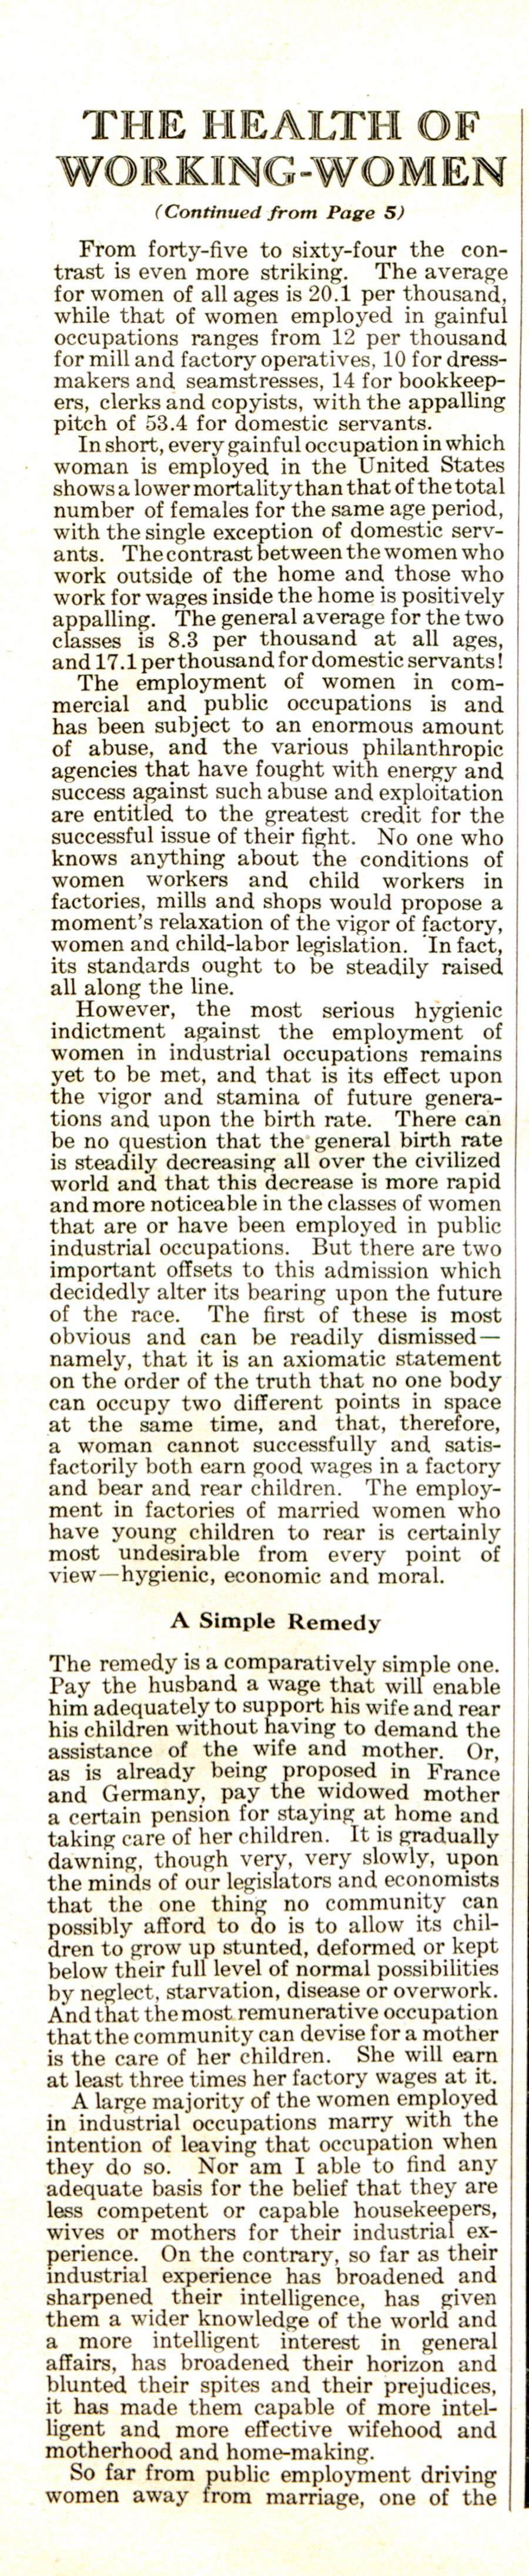 Page 4 of "The Health of Working Women"